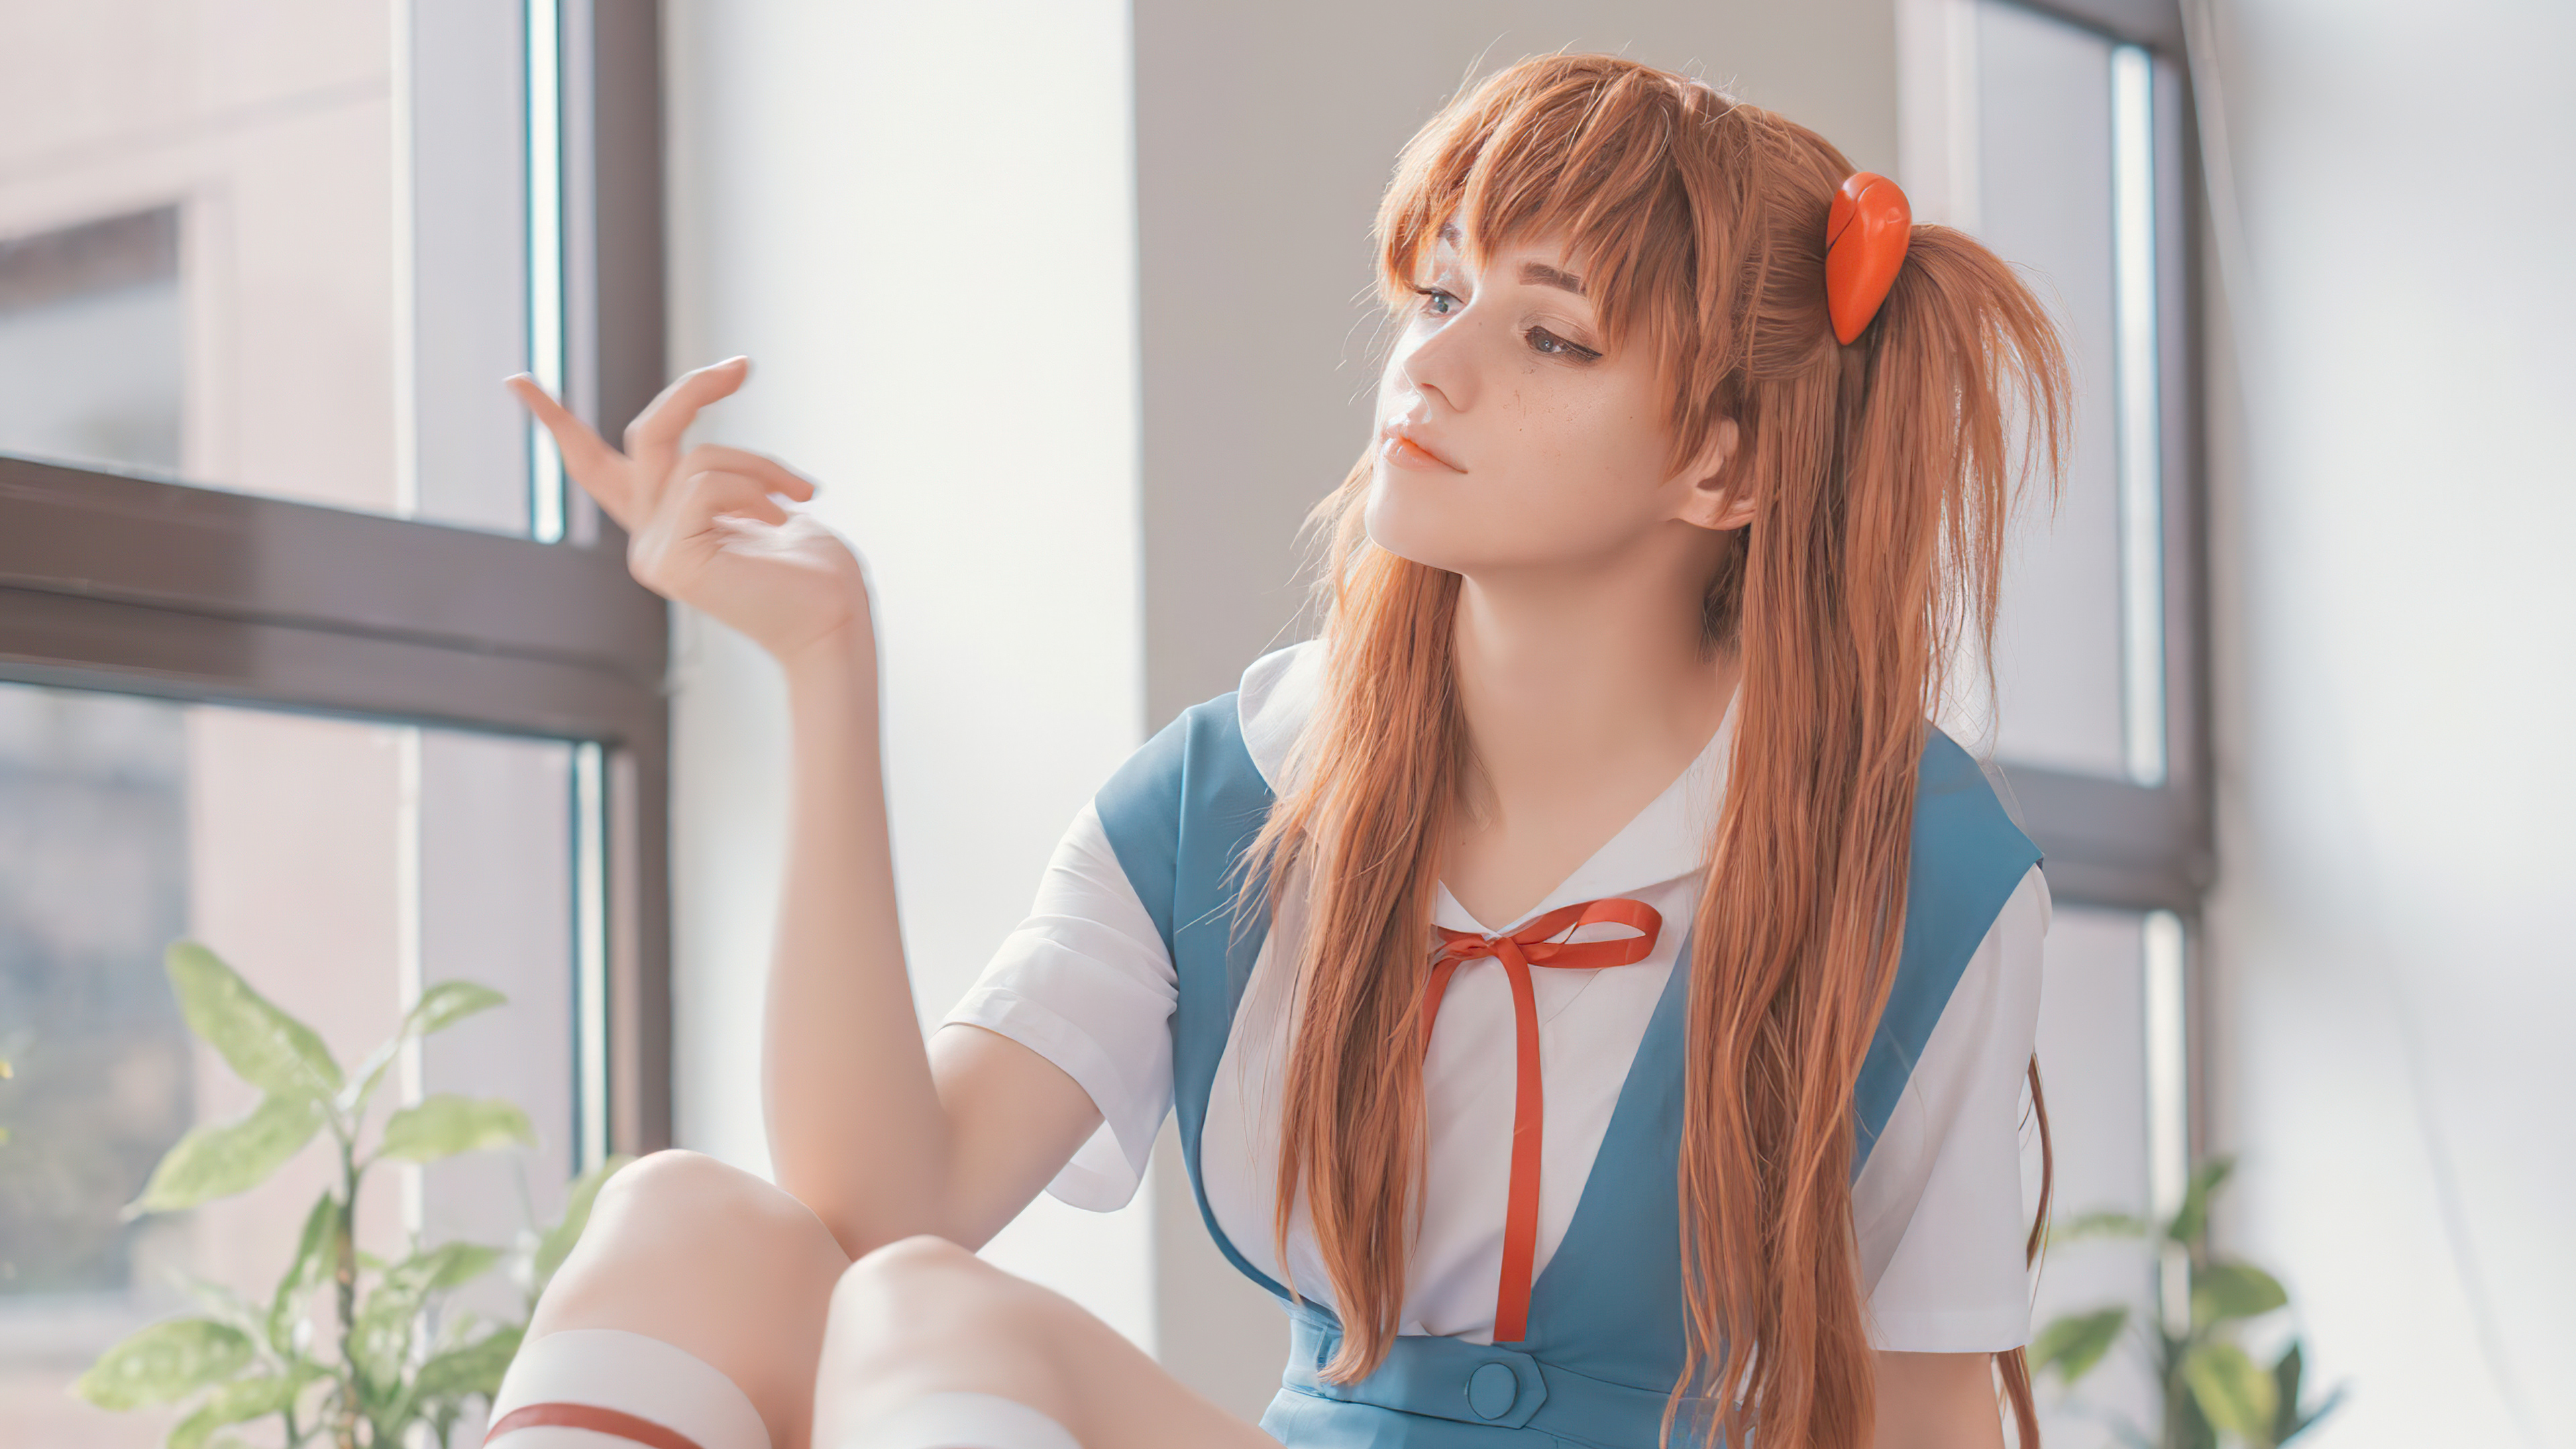 Asuka evangelion cosplay k hd anime k wallpapers images backgrounds photos and pictures